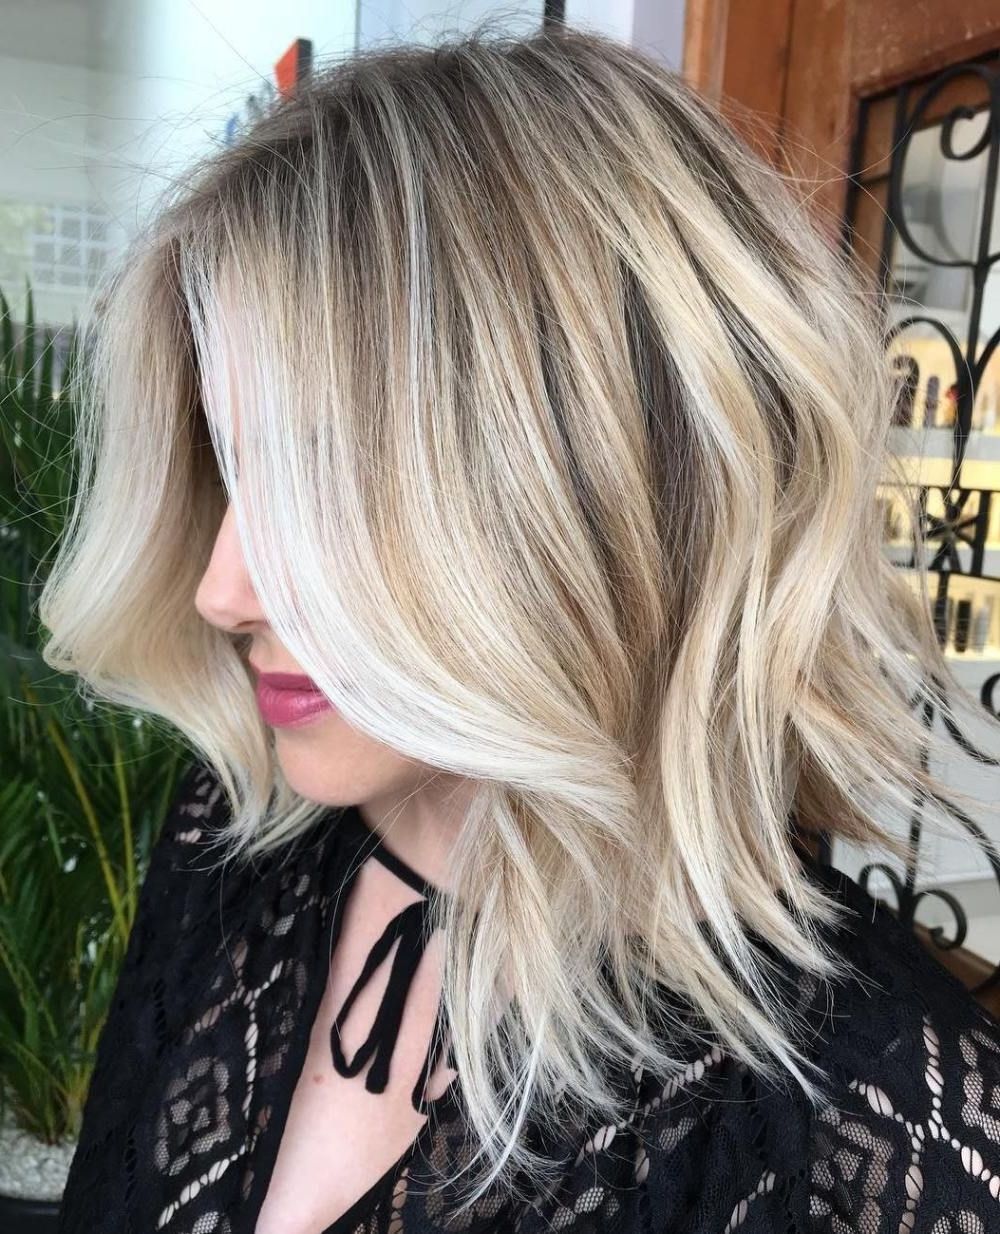 Hairstyles&haircuts Within Well Liked Choppy Cut Blonde Hairstyles With Bright Frame (View 15 of 20)